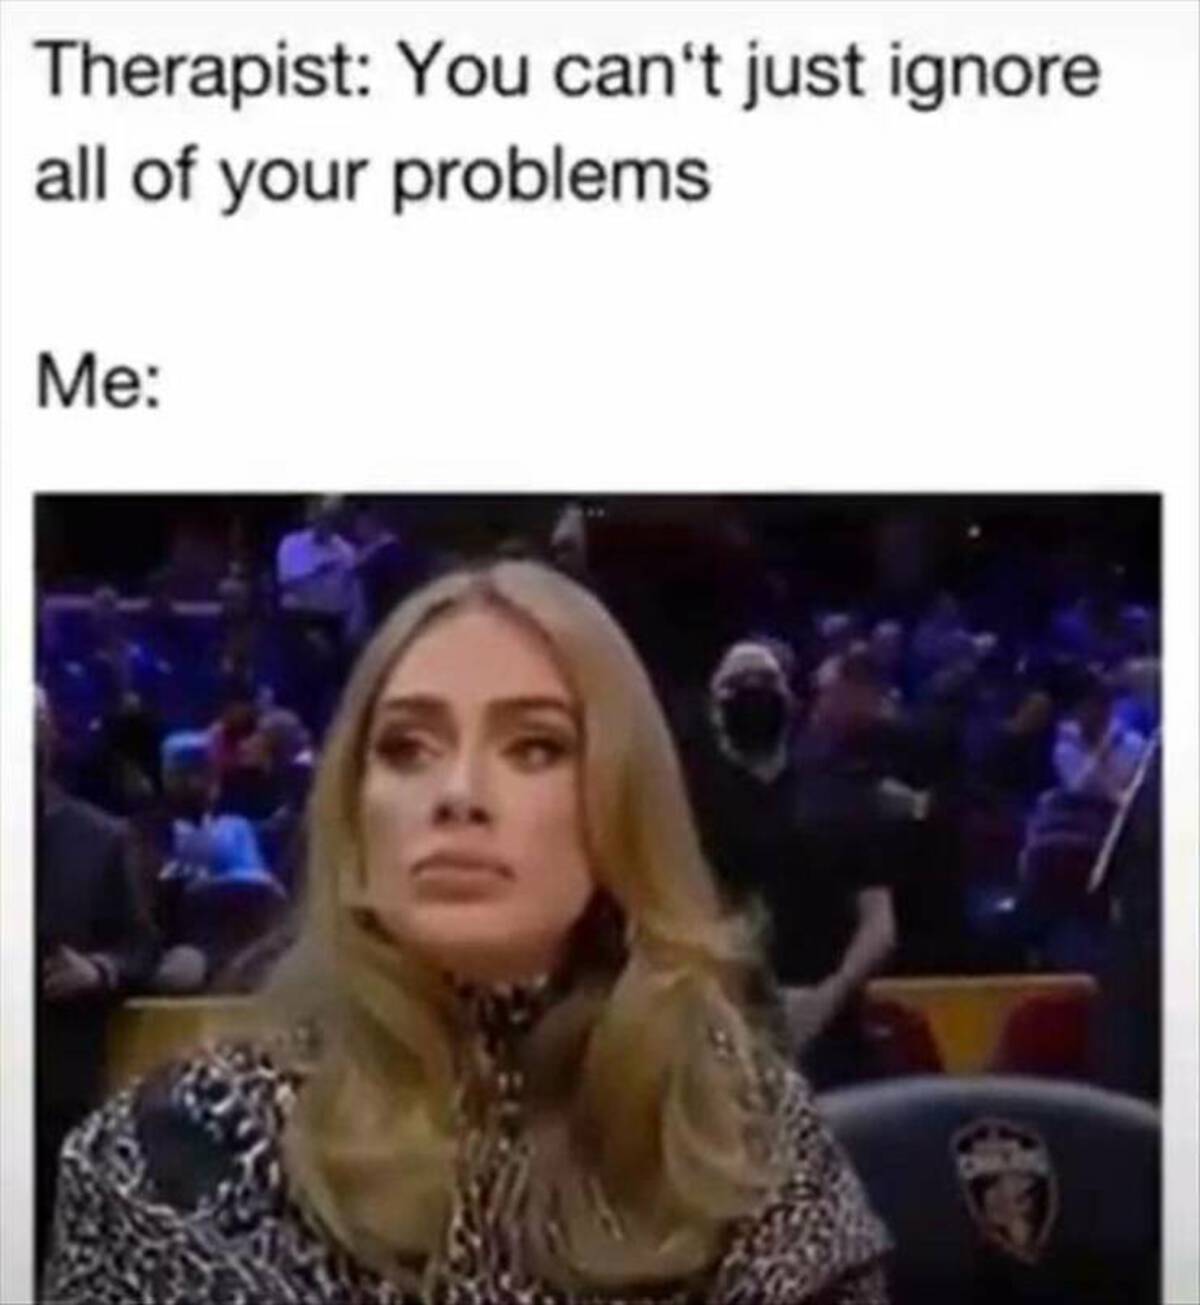 adele ignoring gif - Therapist You can't just ignore all of your problems Me